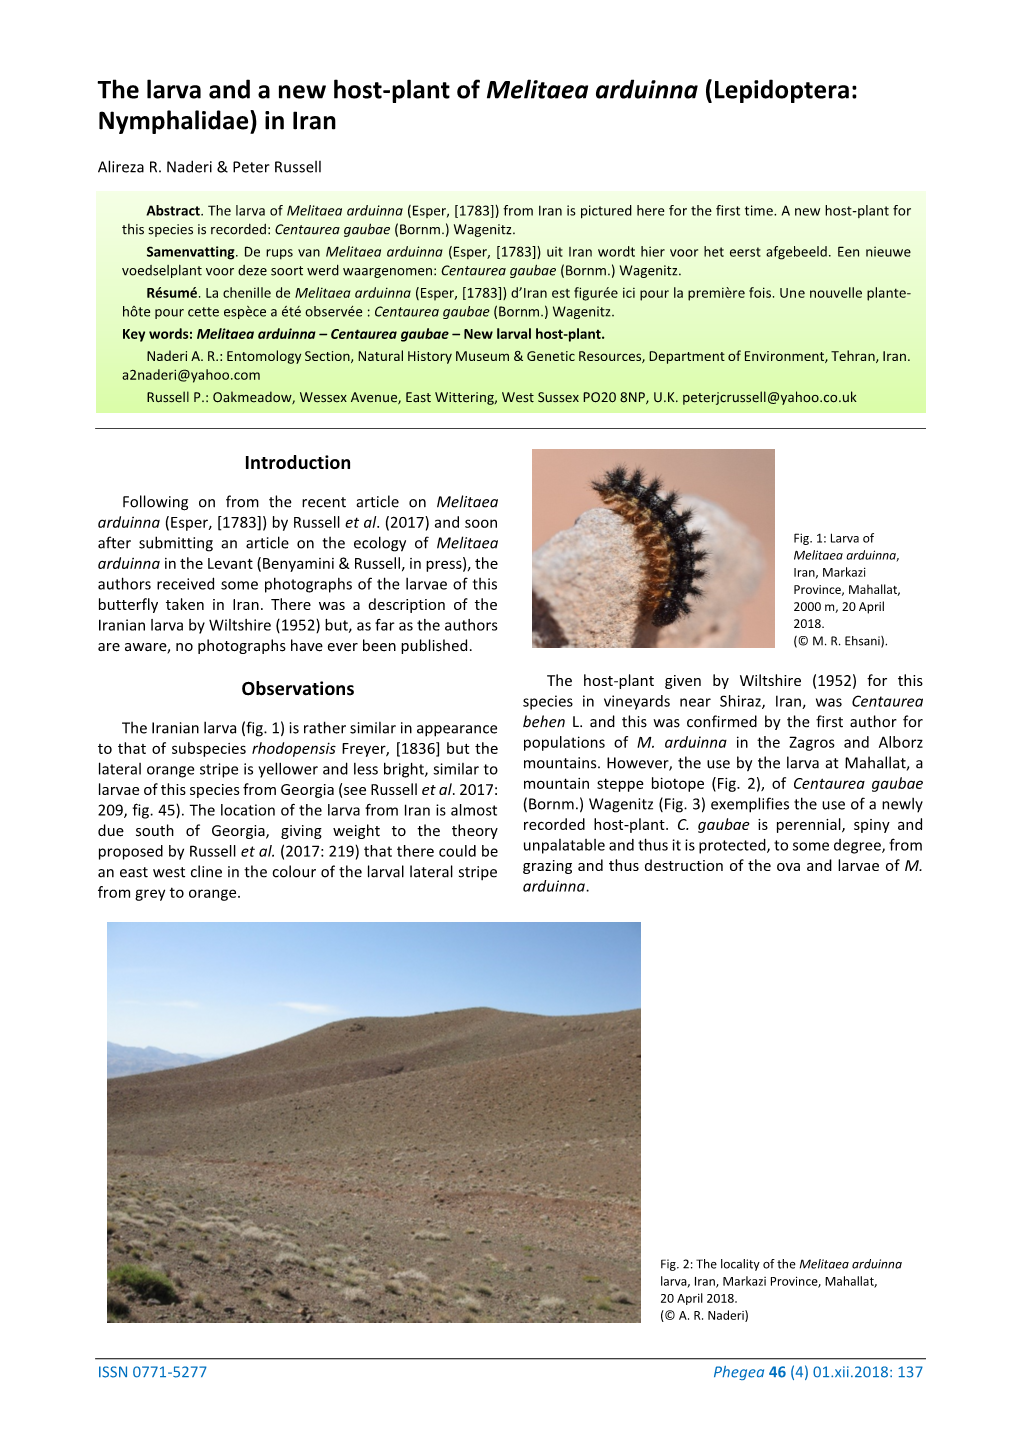 The Larva and a New Host-Plant of Melitaea Arduinna (Lepidoptera: Nymphalidae) in Iran